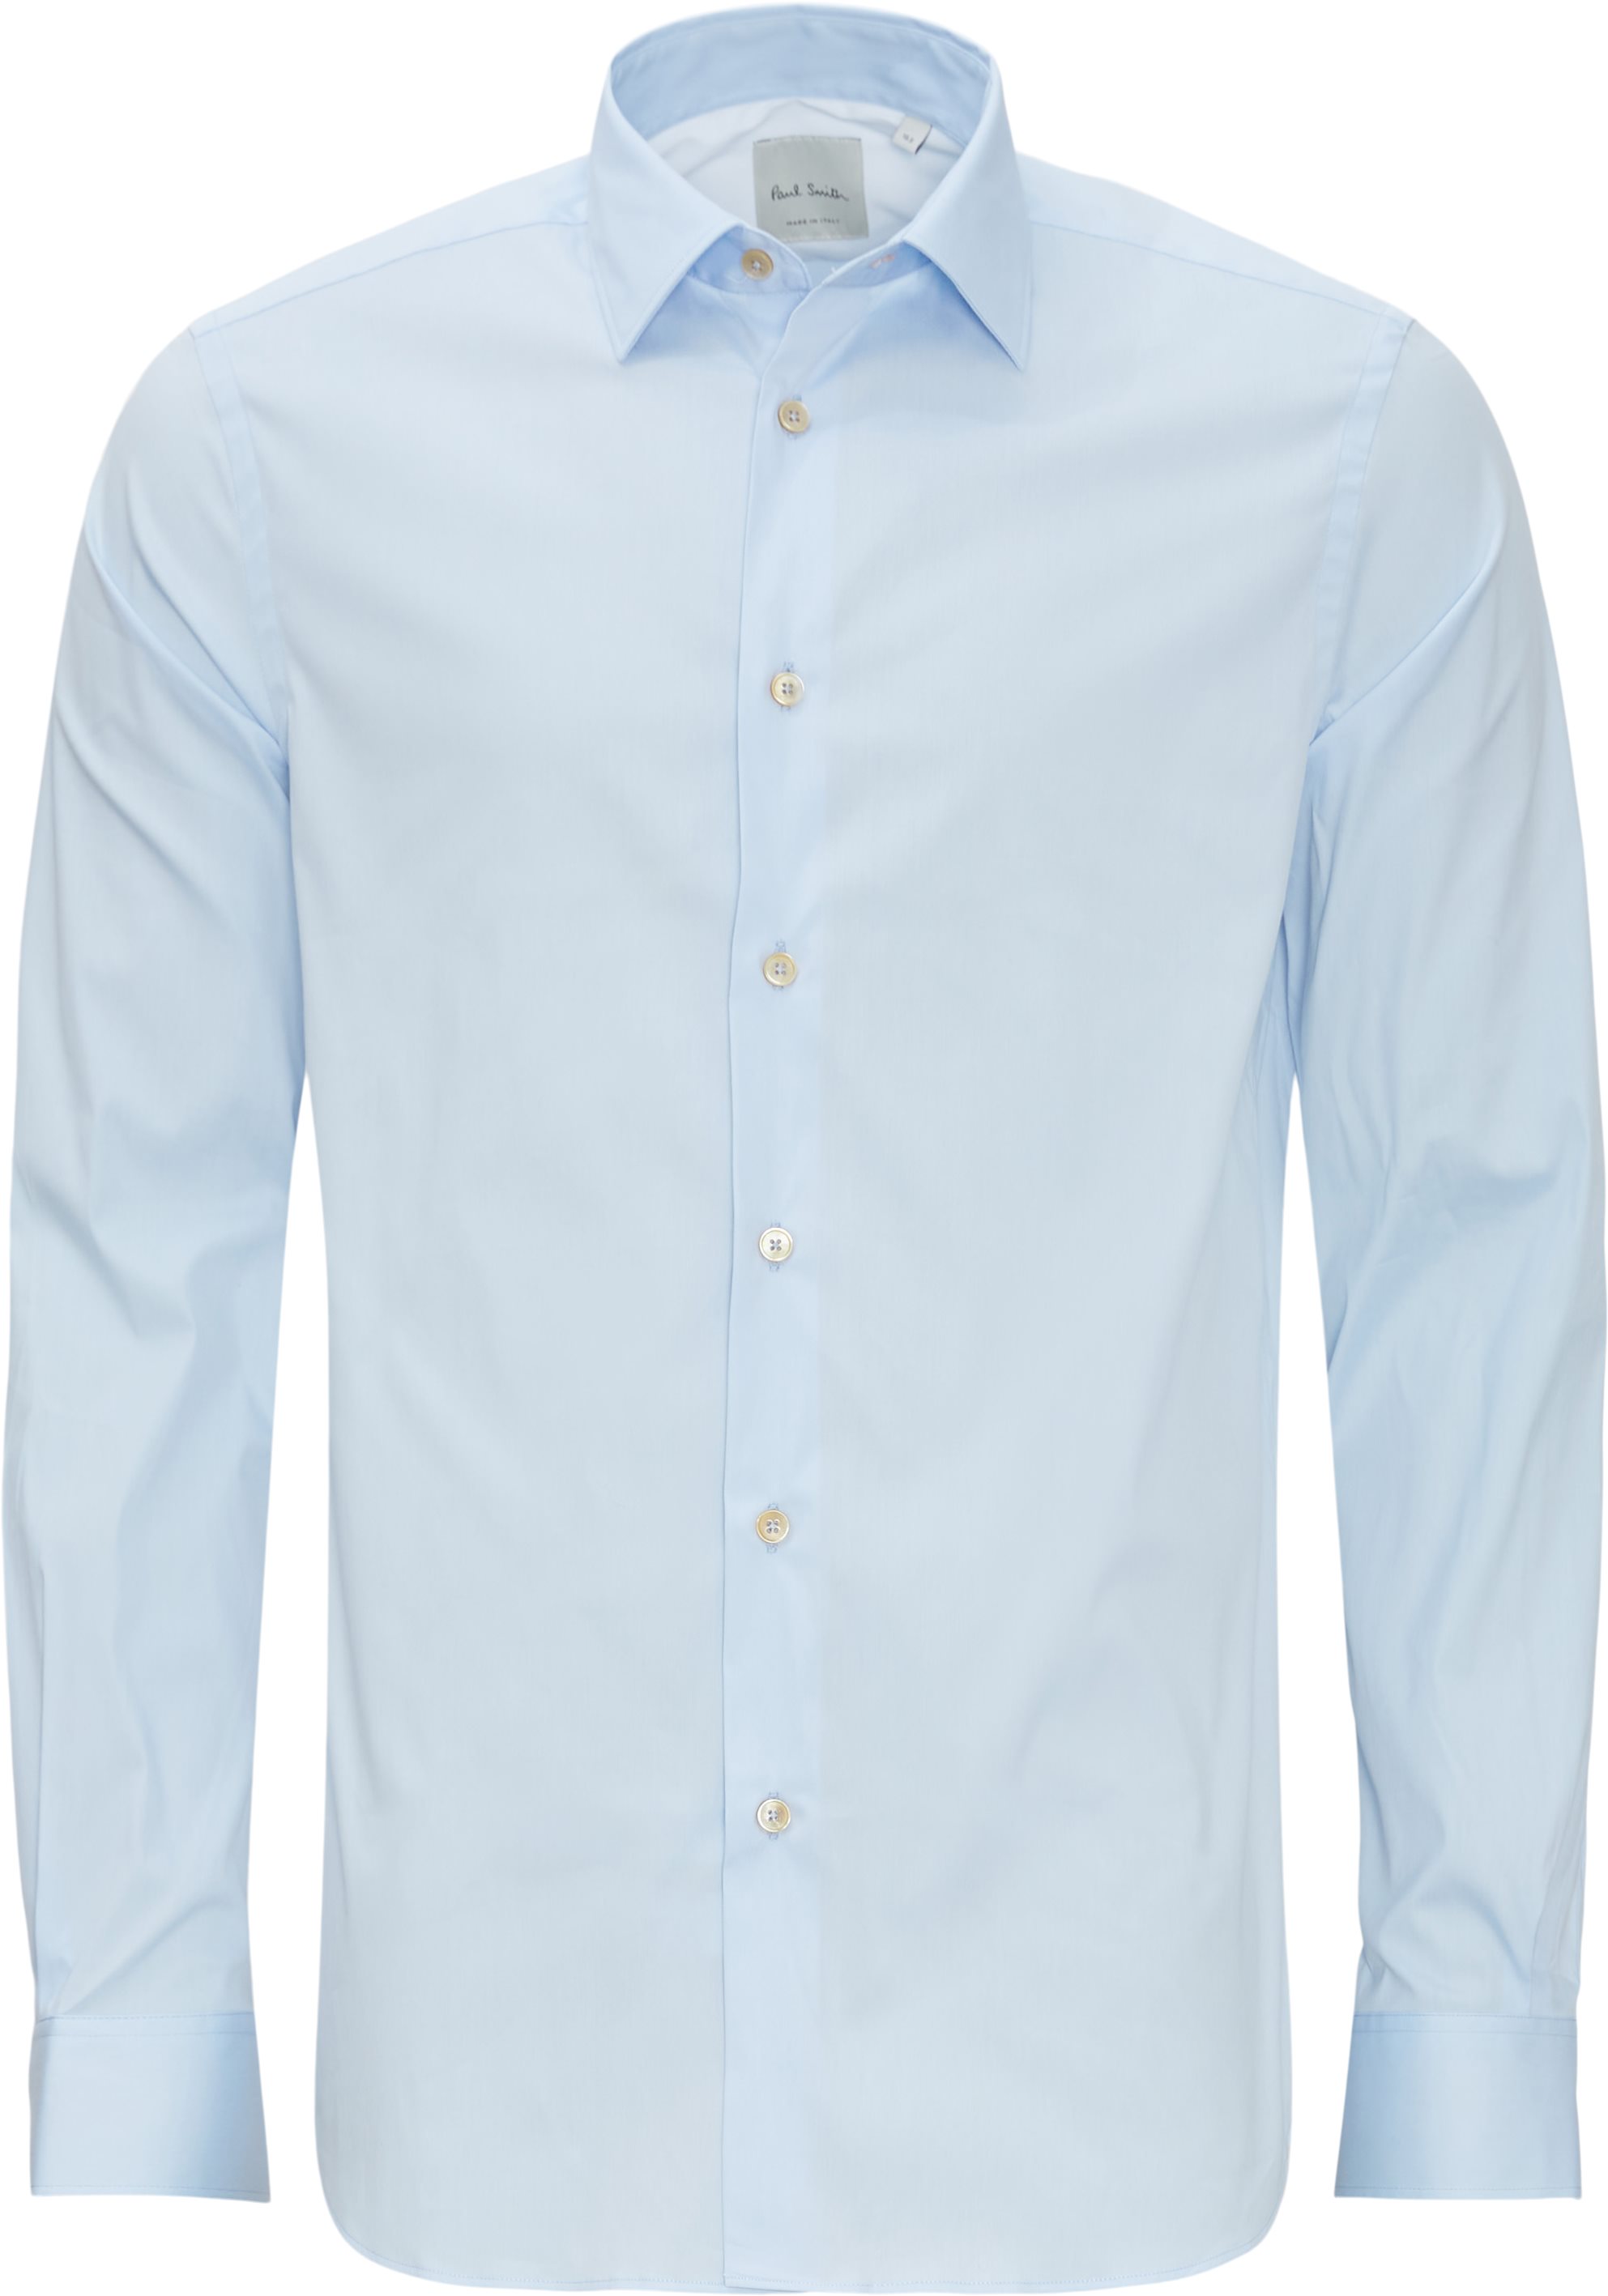 Shirts - Contemporary fit - Blue